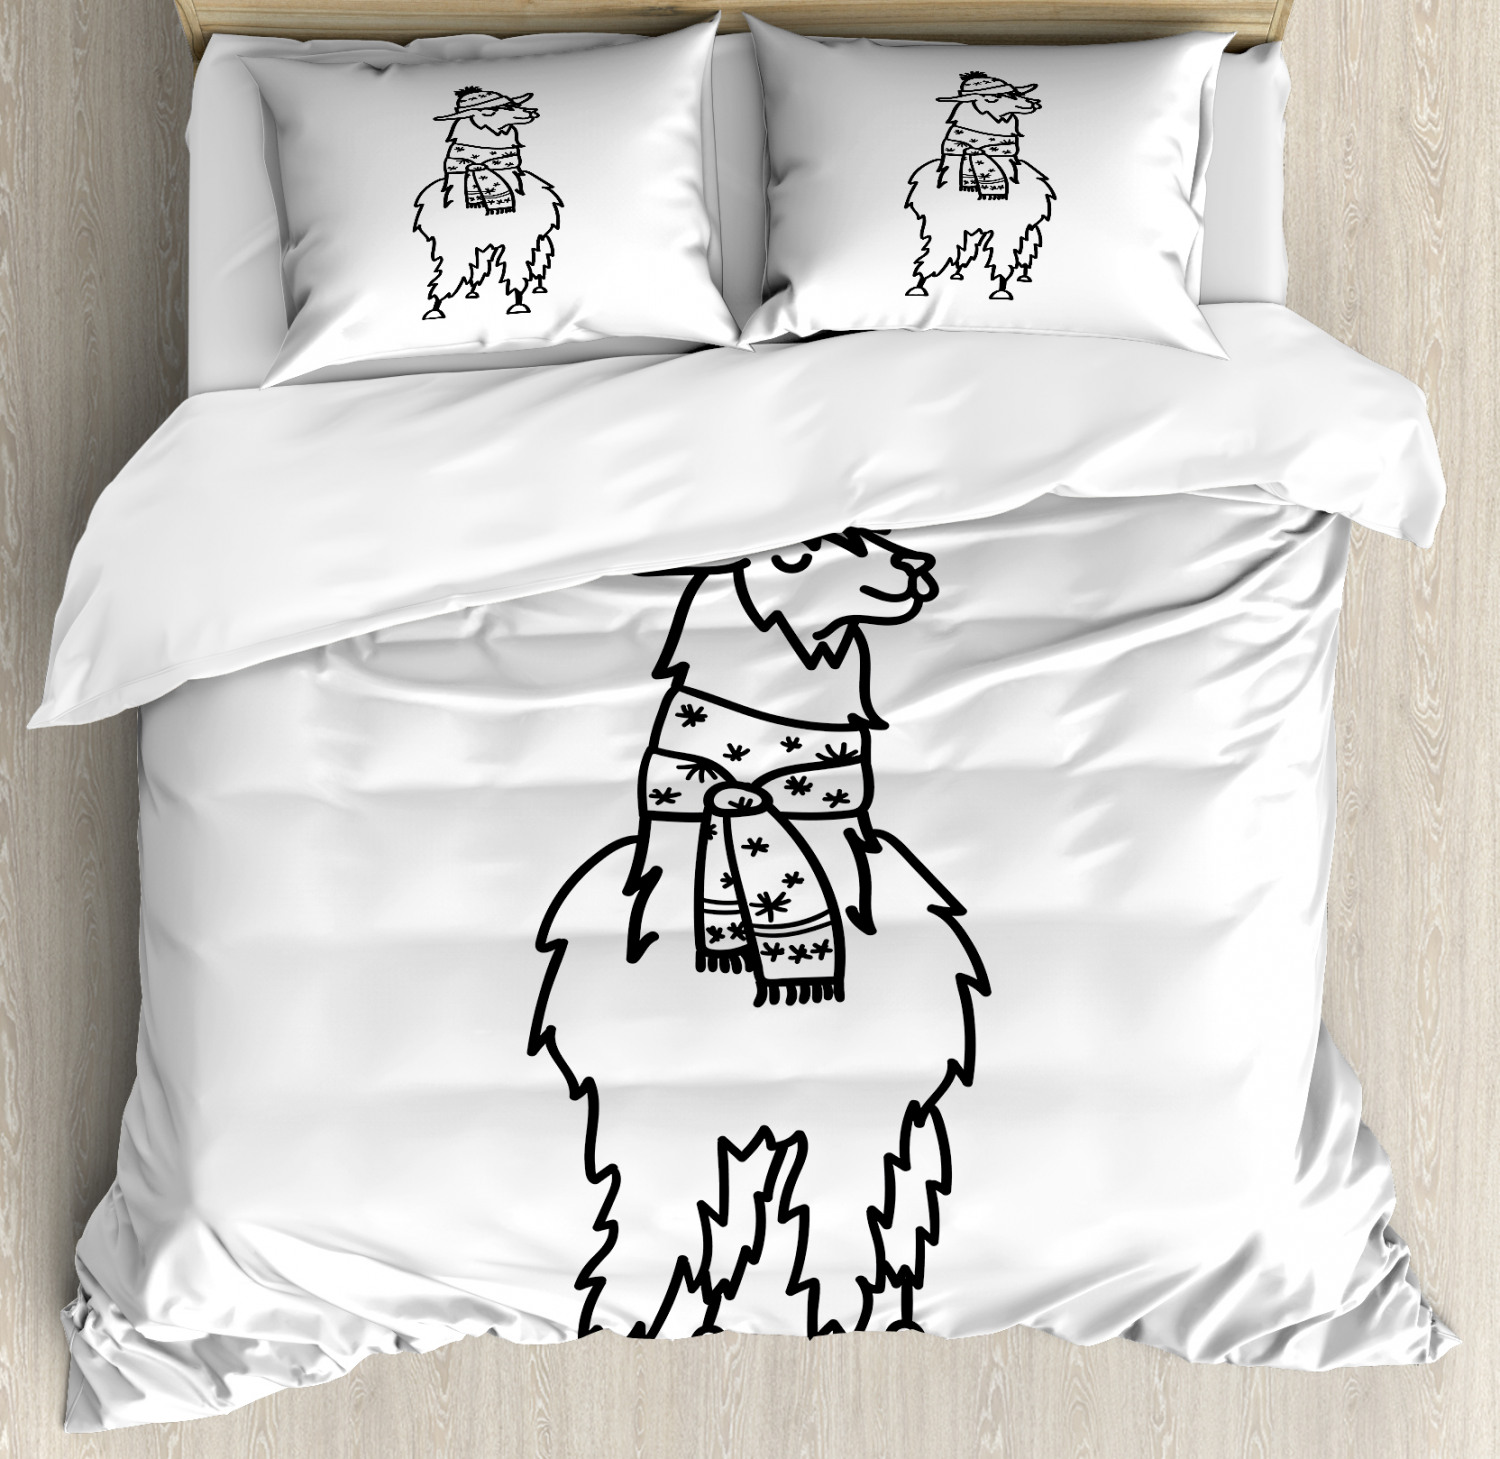 Llama Queen Size Duvet Cover Set, South American Domestic Alpaca Animal with Winter Attire Monochrome Illustration, Decorative 3 Piece Bedding Set with 2 Pillow Shams, Black White, by Ambesonne - image 1 of 3